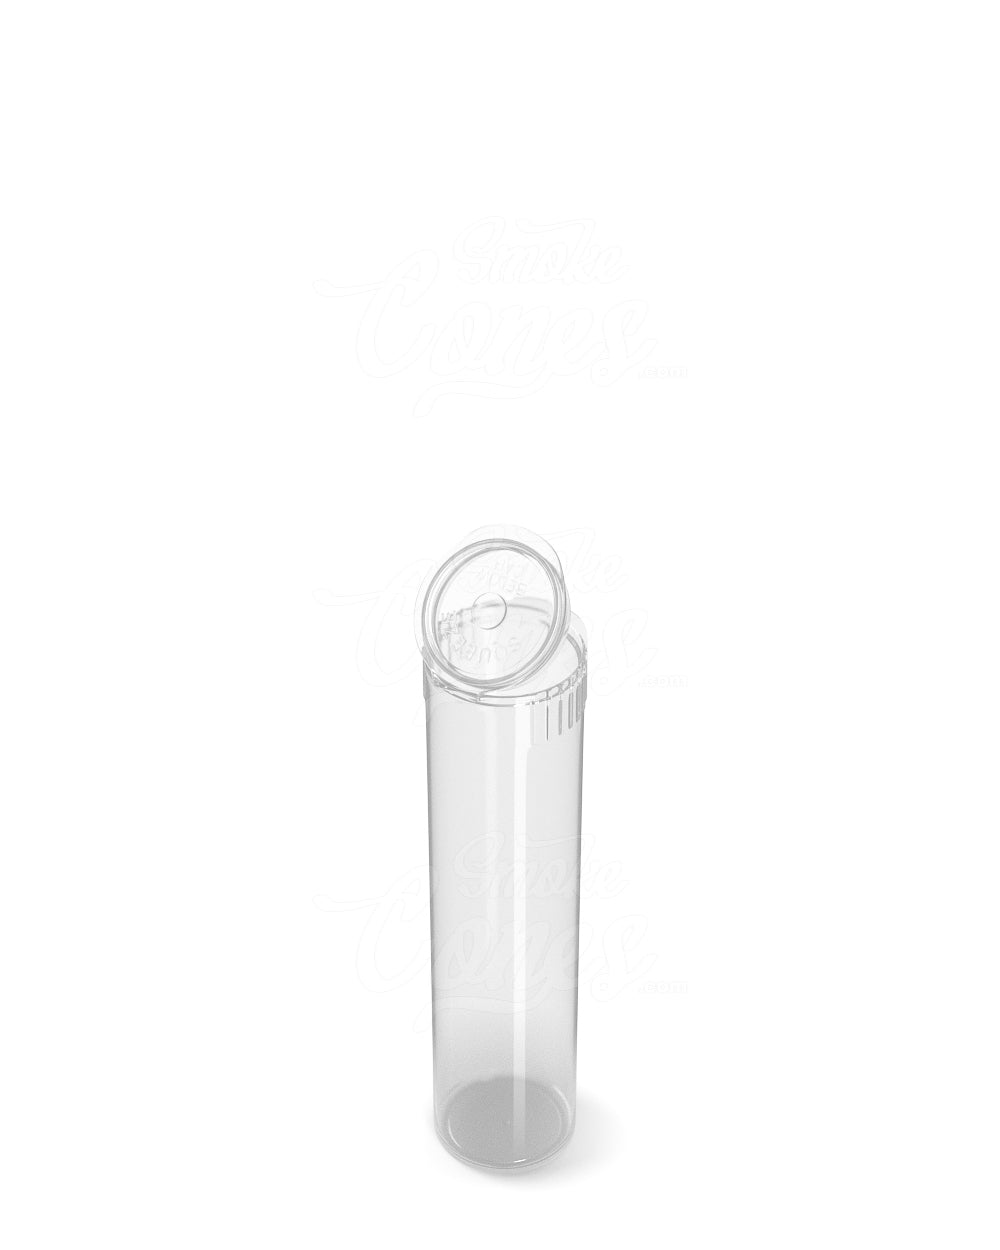 78mm Child Resistant Pre-Roll Littles Tubes - 2100 Qty.